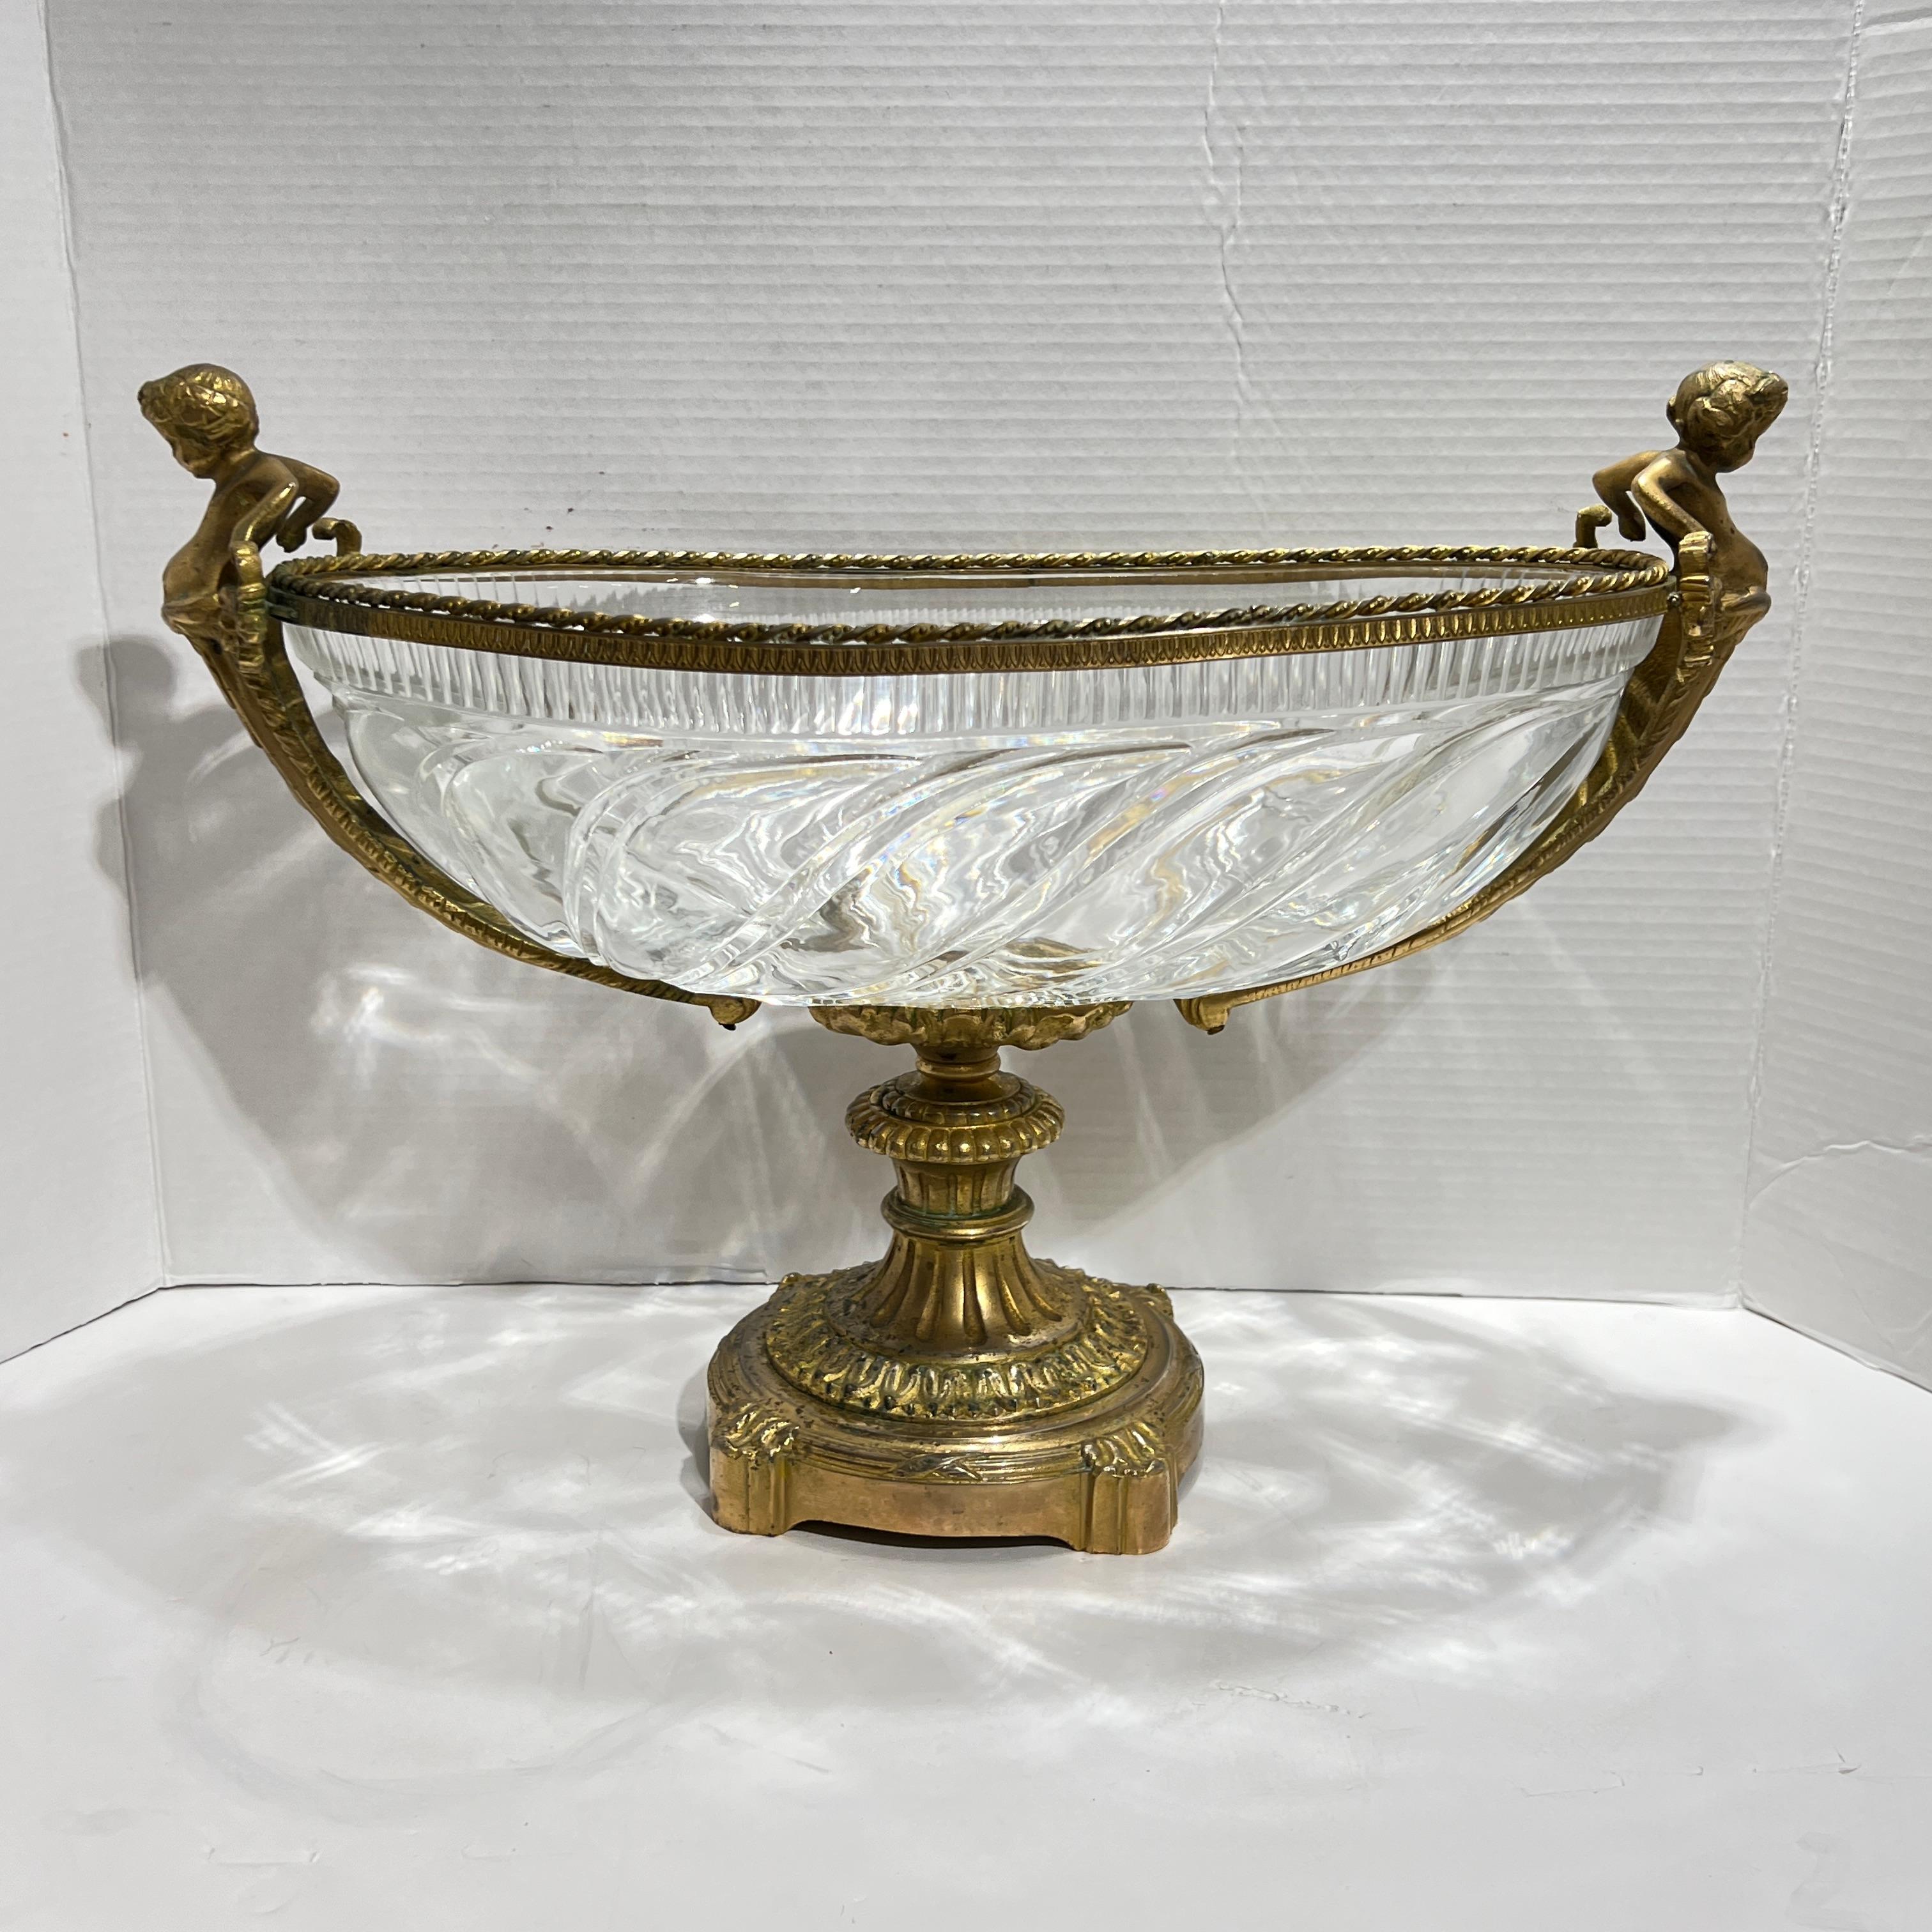 Baccarat style Gilt Bronze Mounted Crystal Glass Centerpiece Bowl 11